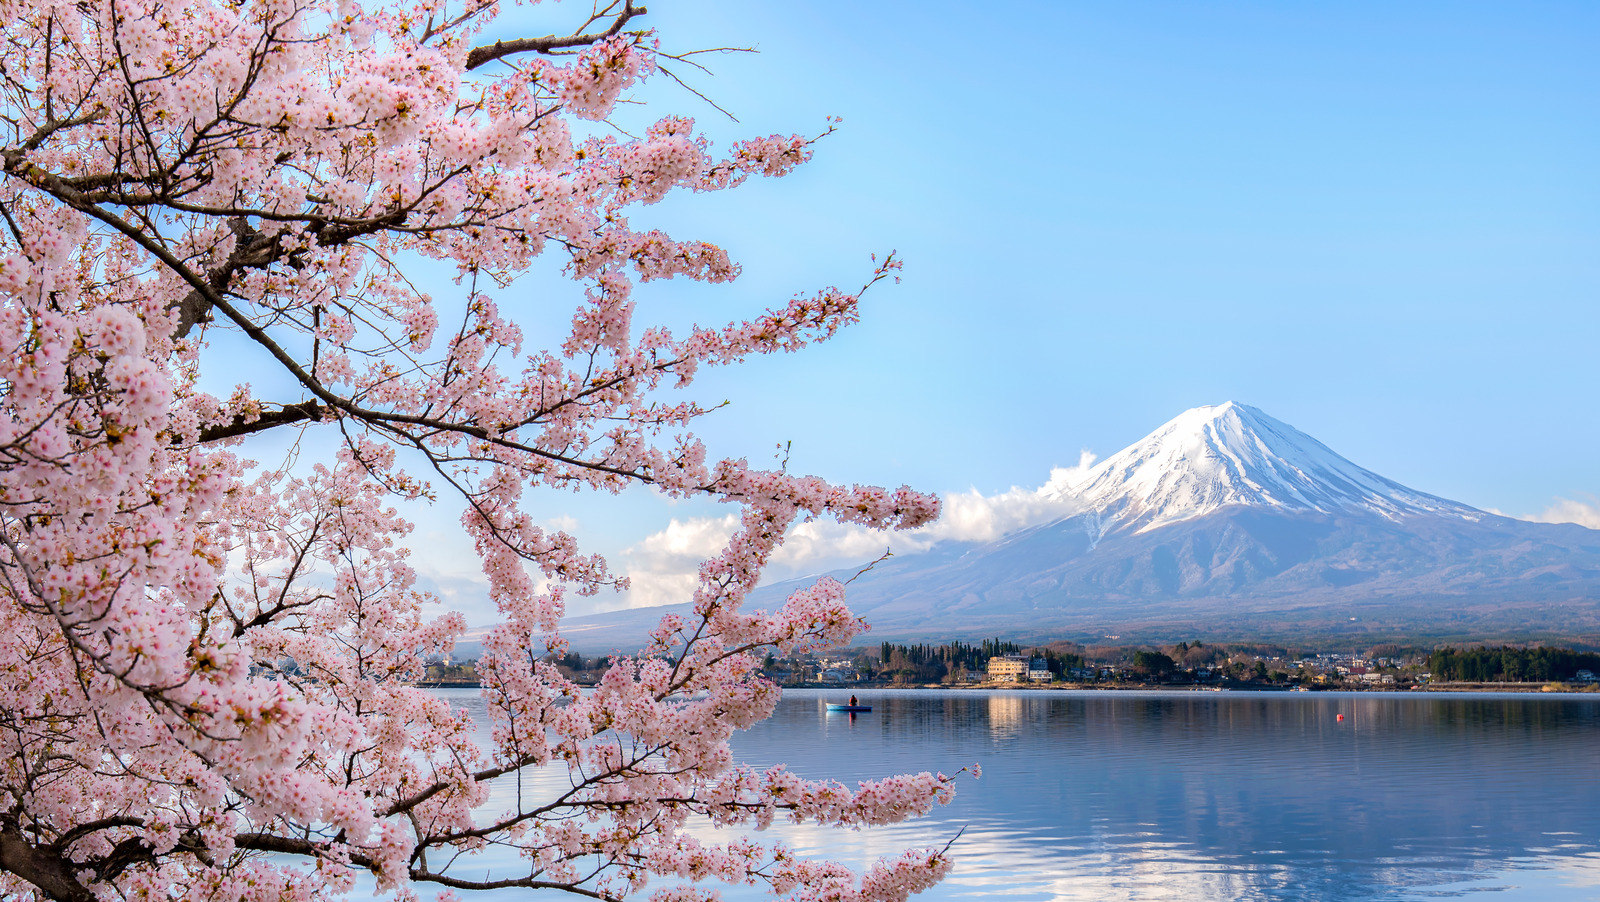 When and where to see cherry blossoms in the U.S.